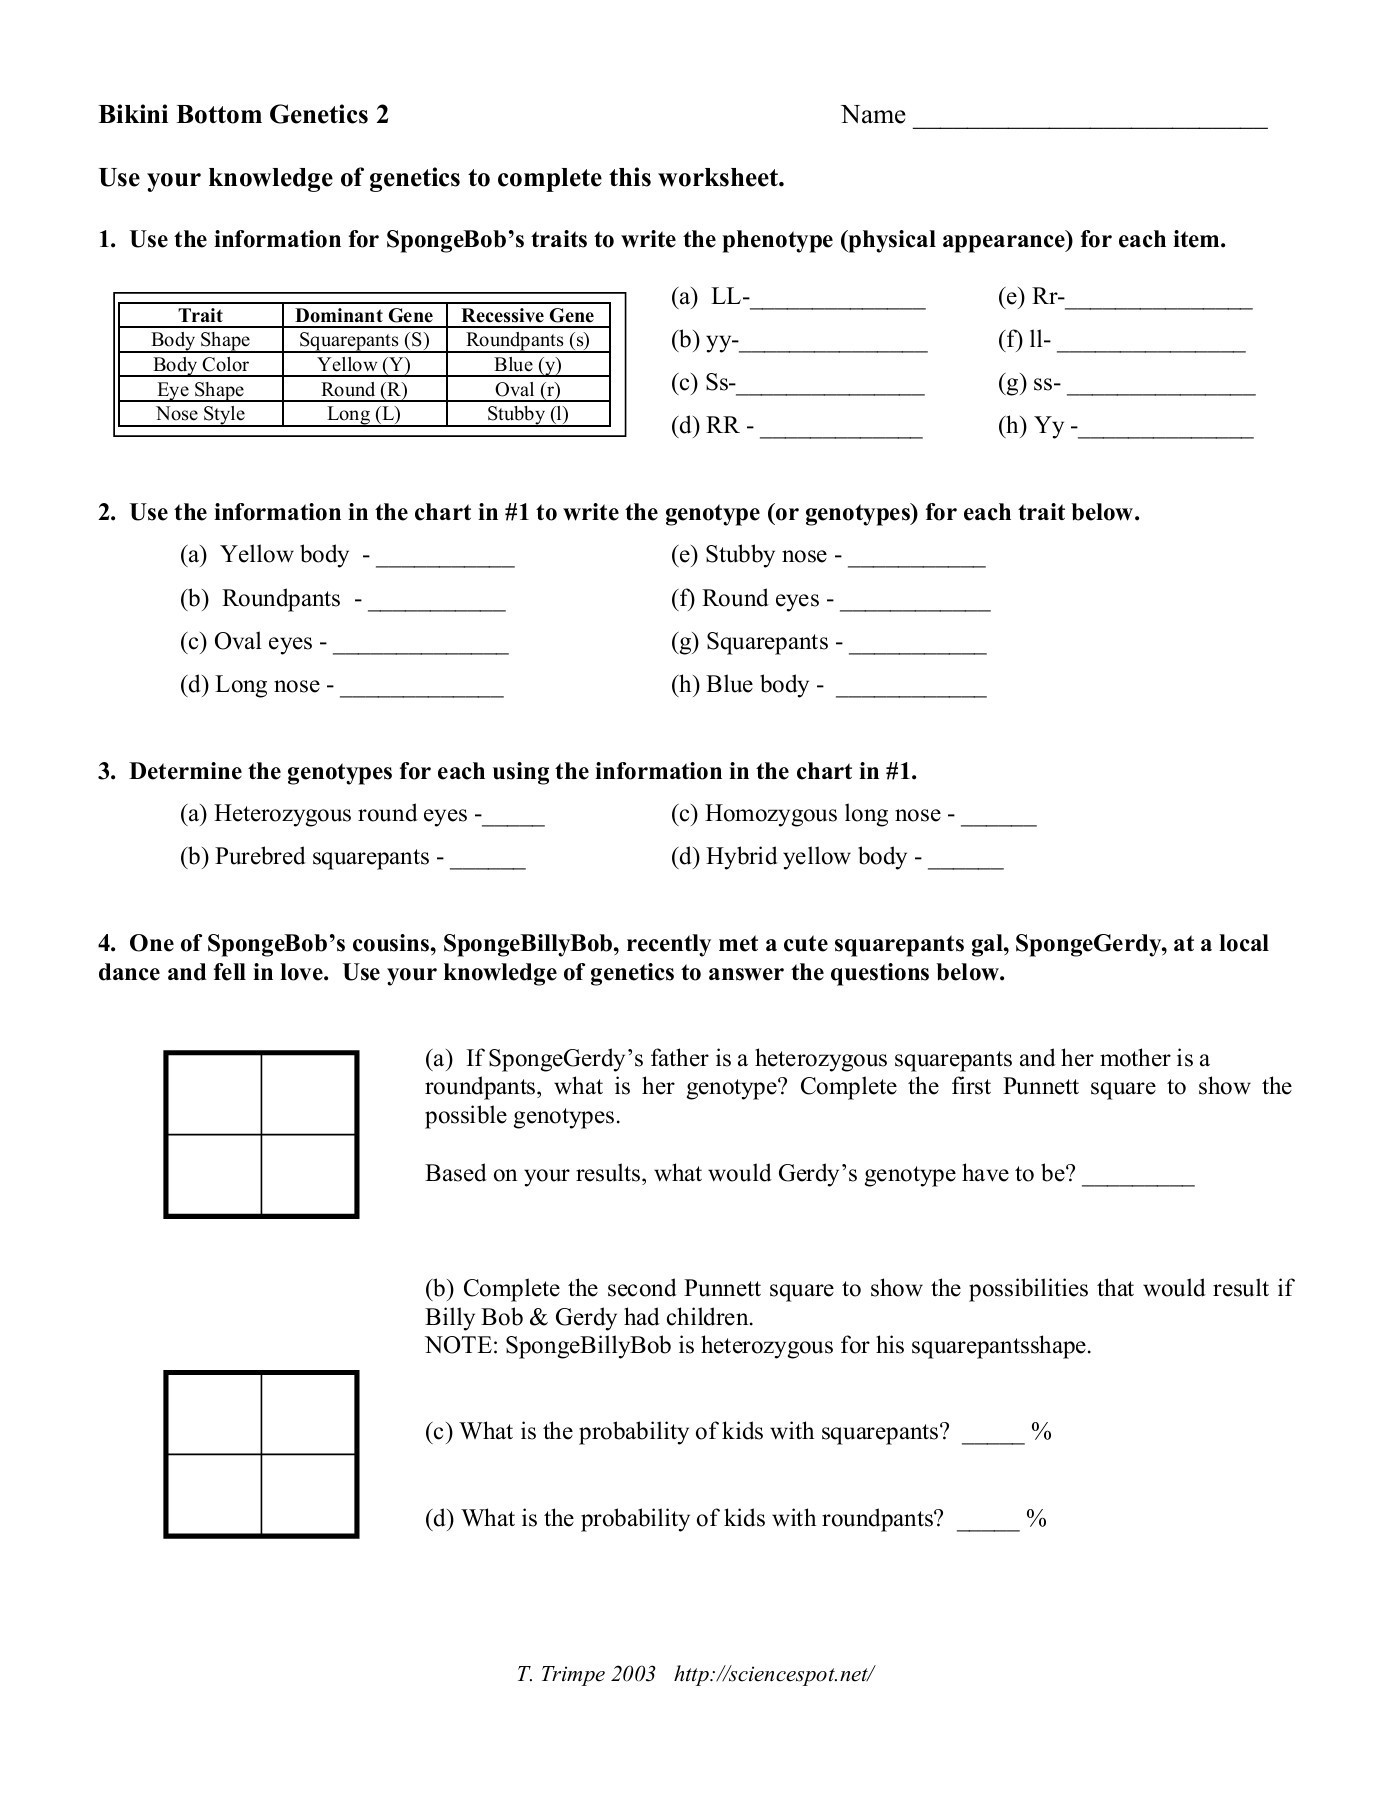 Genotypes and Phenotypes Worksheet Answers Use Your Knowledge Of Genetics to Plete This Worksheet